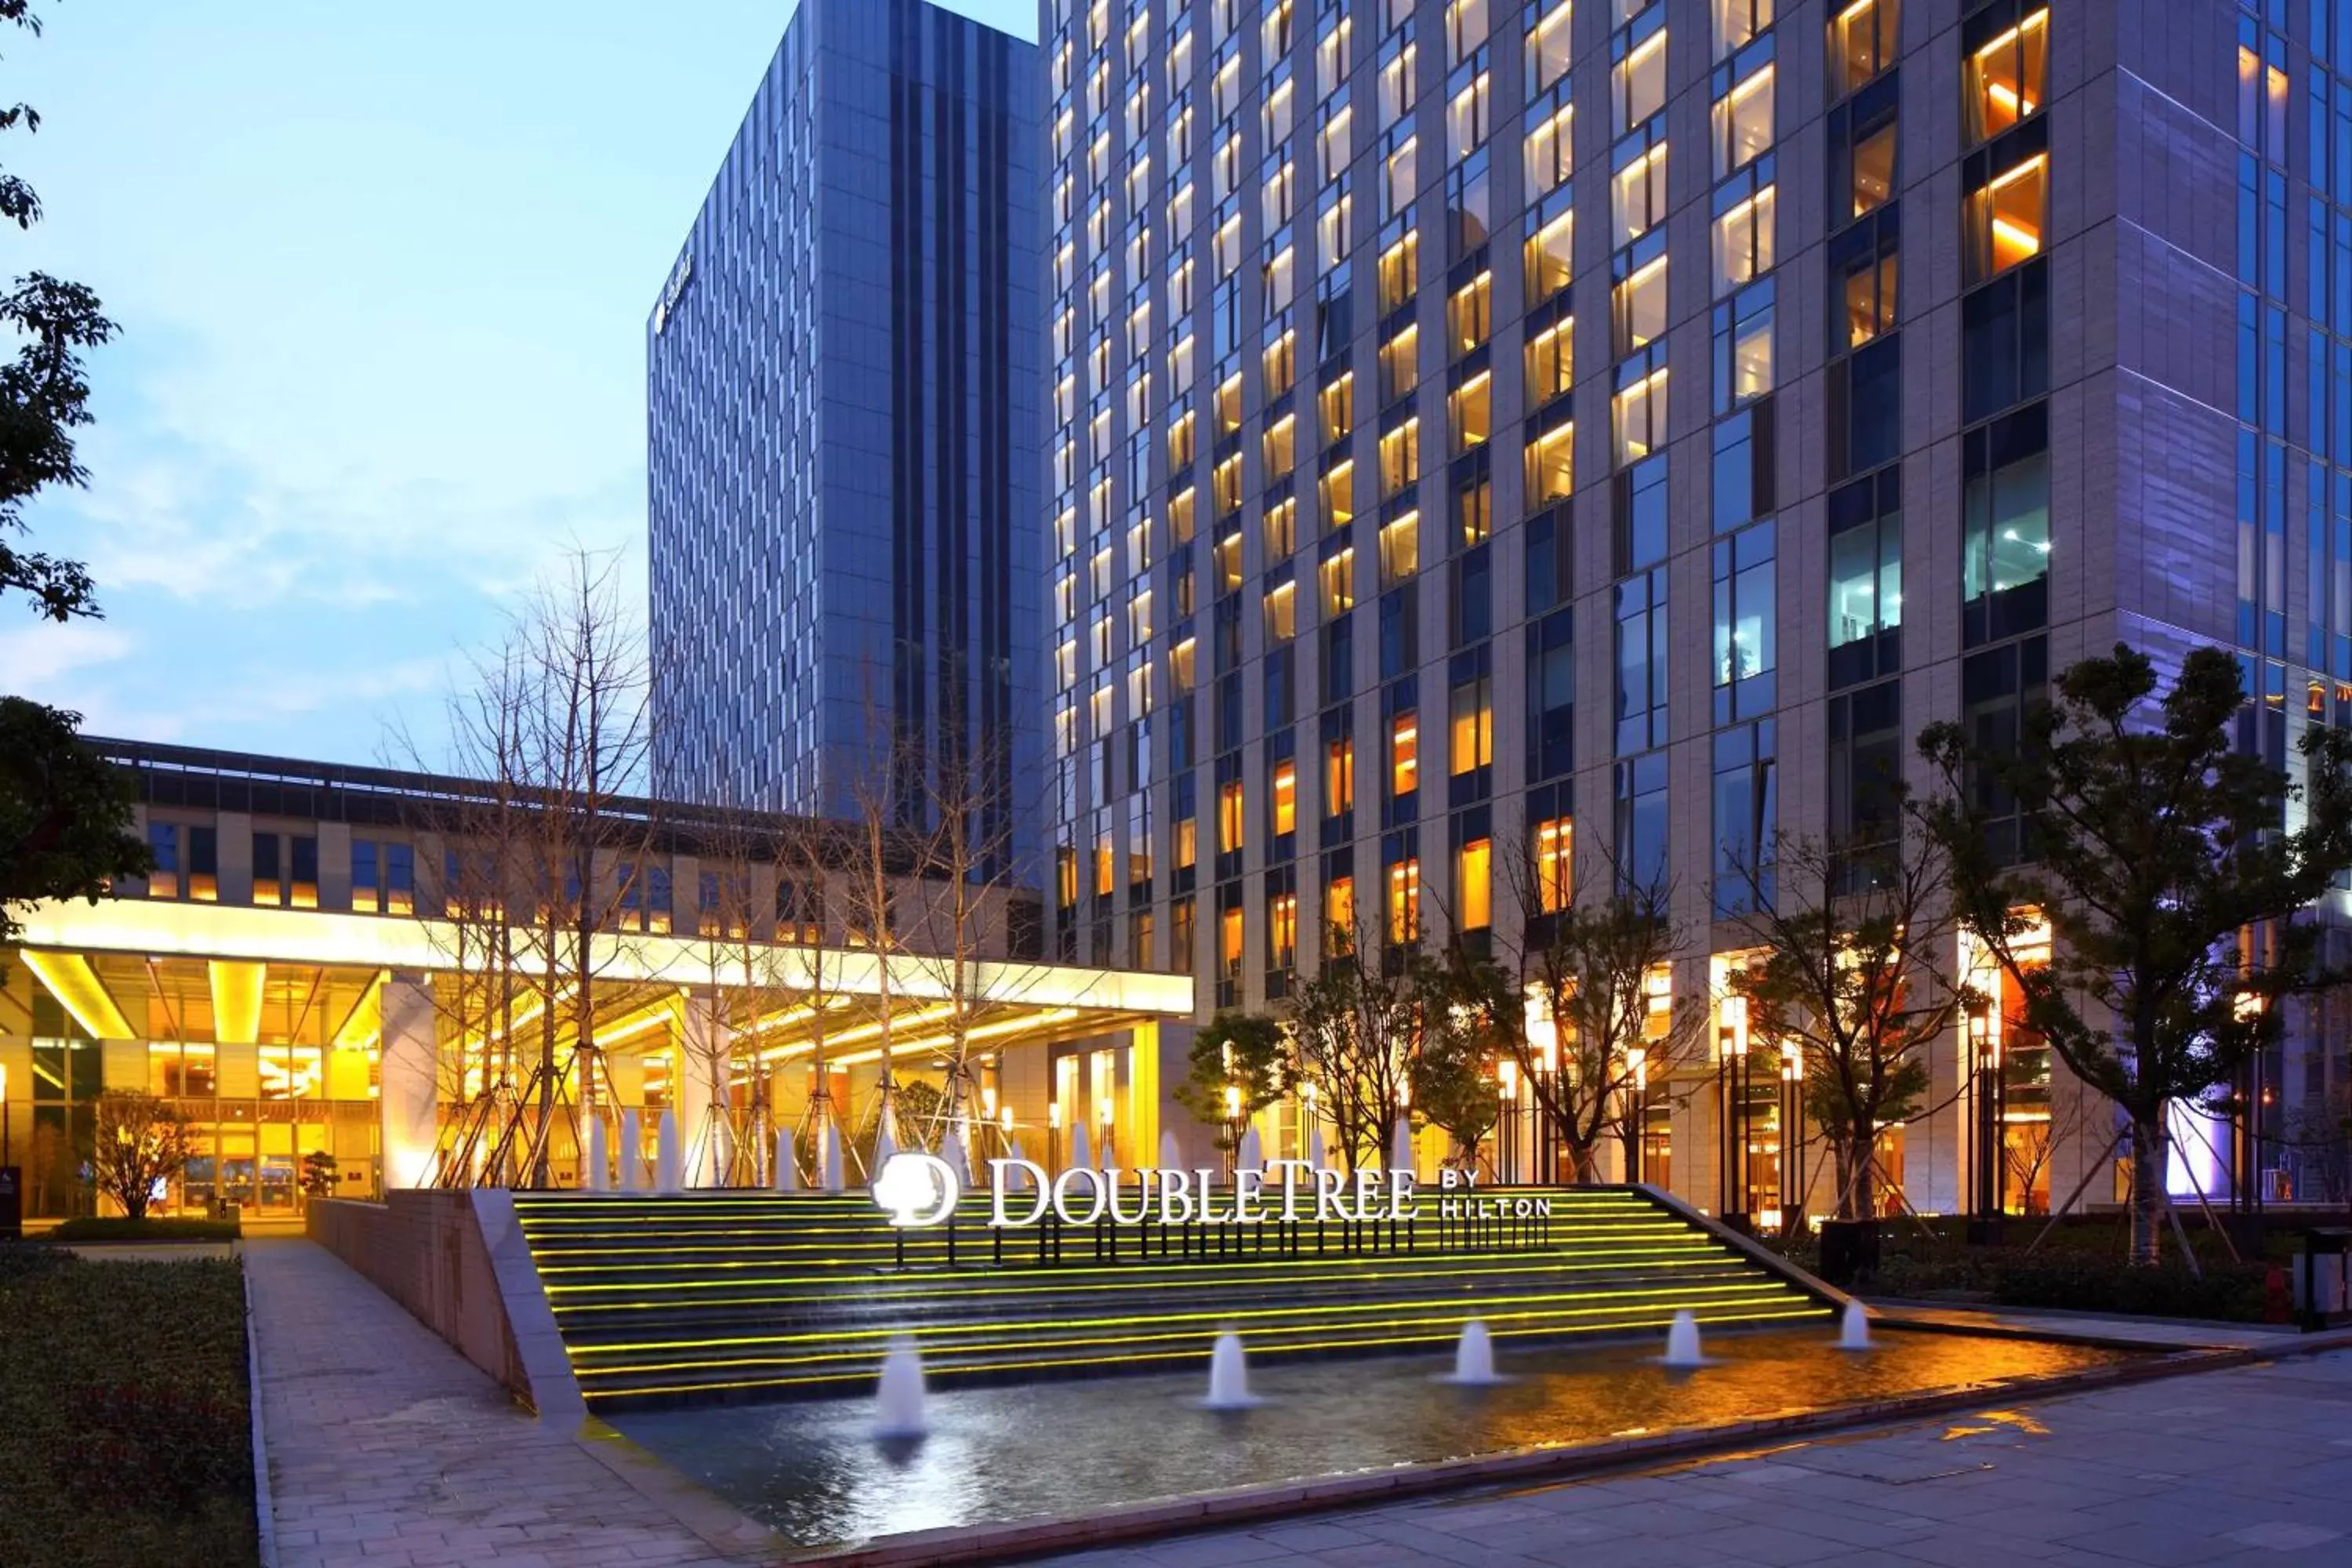 Property Building in DoubleTree by Hilton Hangzhou East